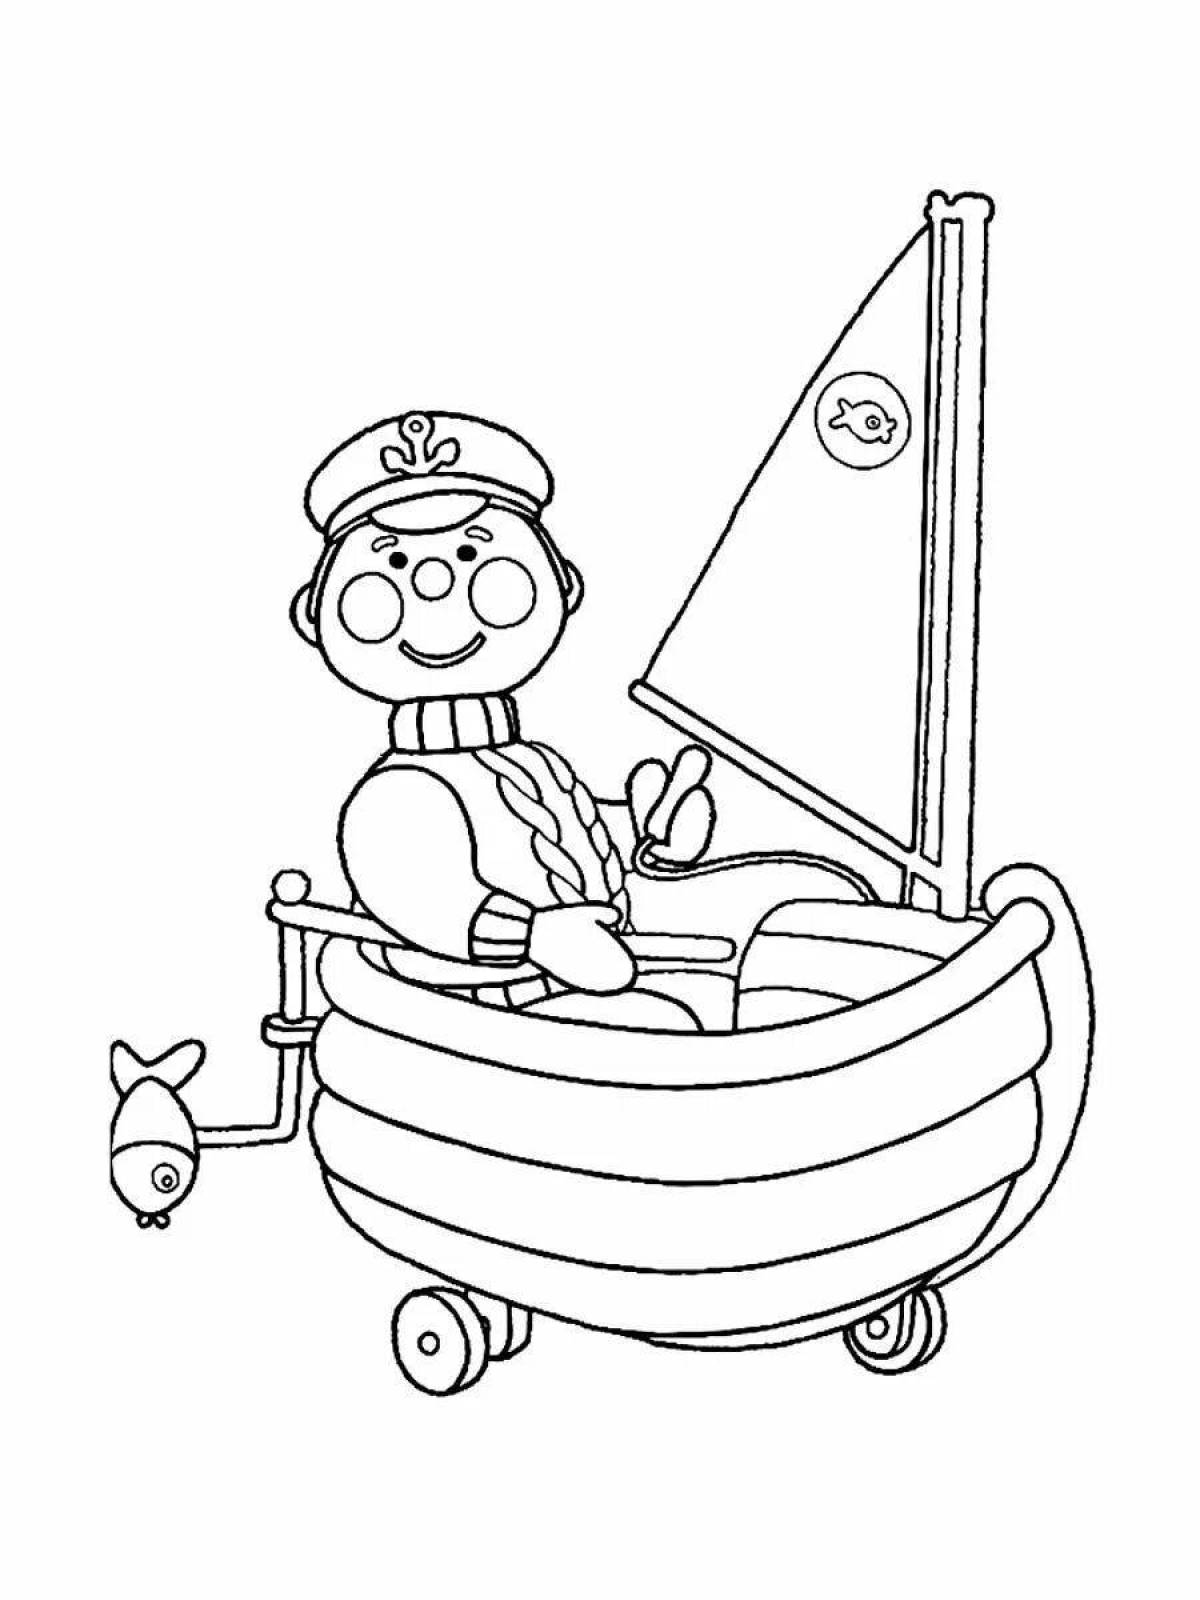 Color-lively andy coloring page